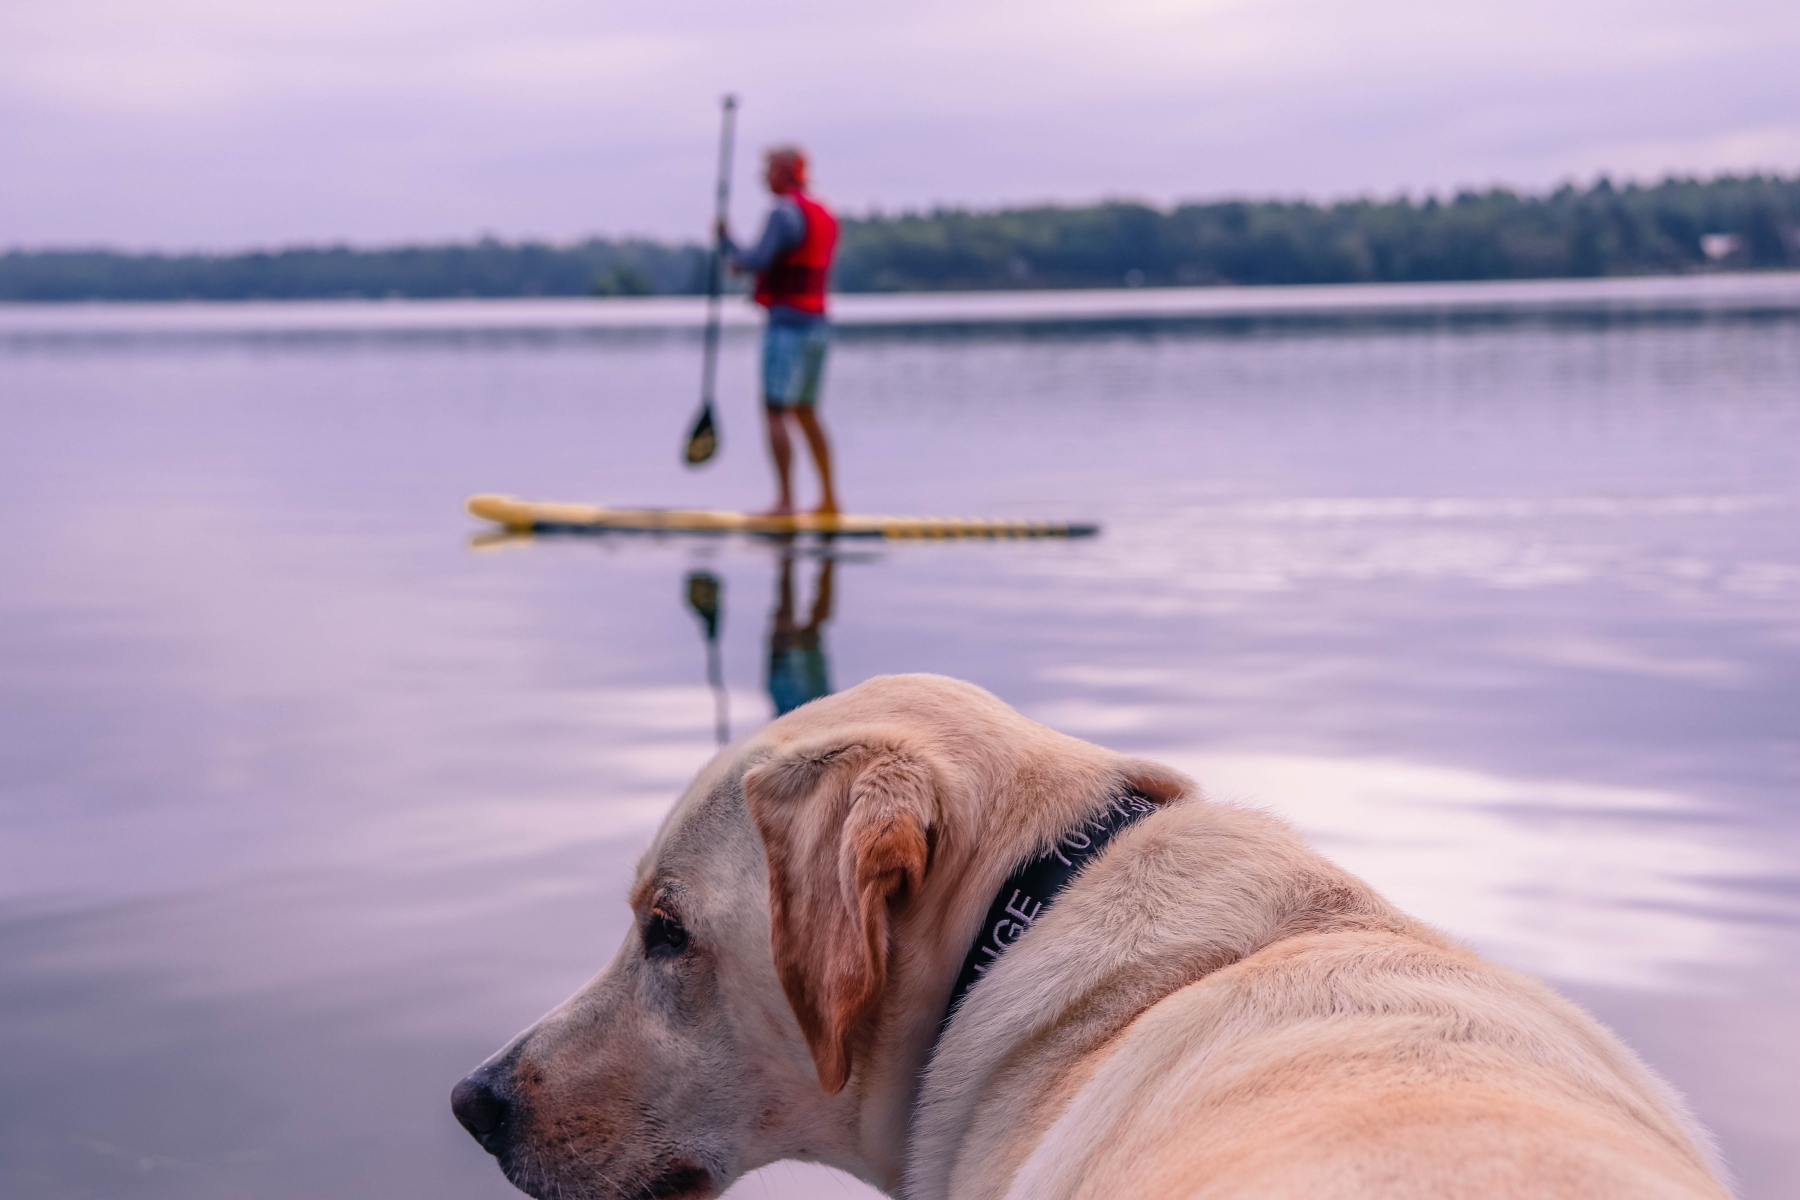 Dog Waiting for Paddle boarder